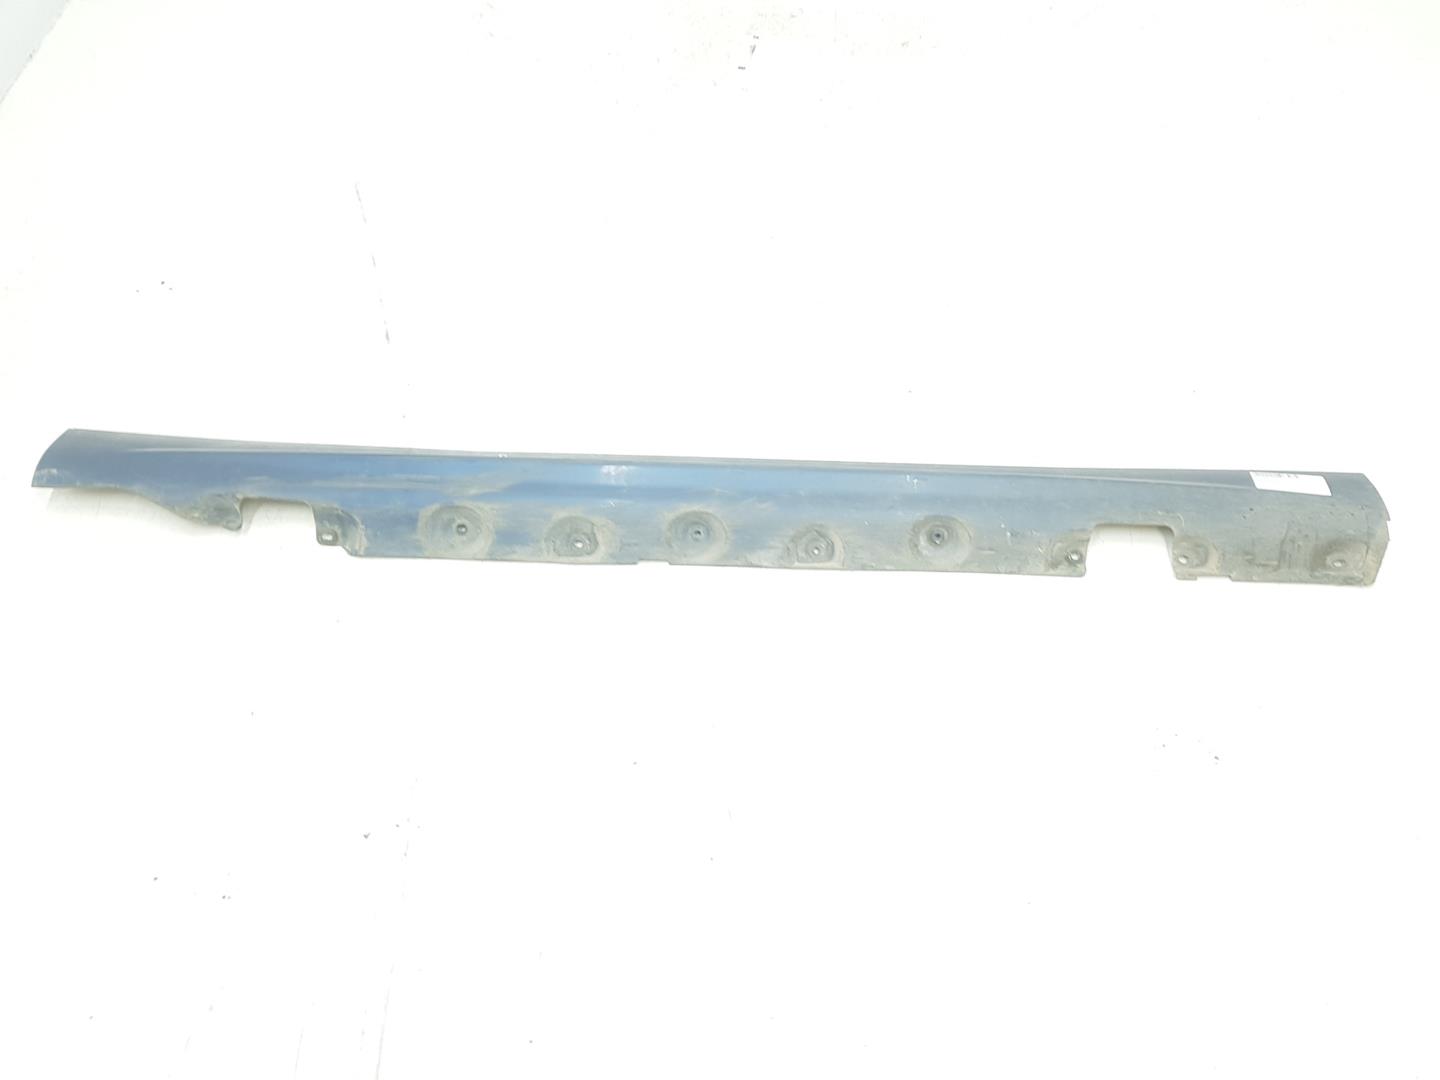 BMW 3 Series E46 (1997-2006) Other Body Parts 51718226122, 51718226122, COLORAZUL364 19869834